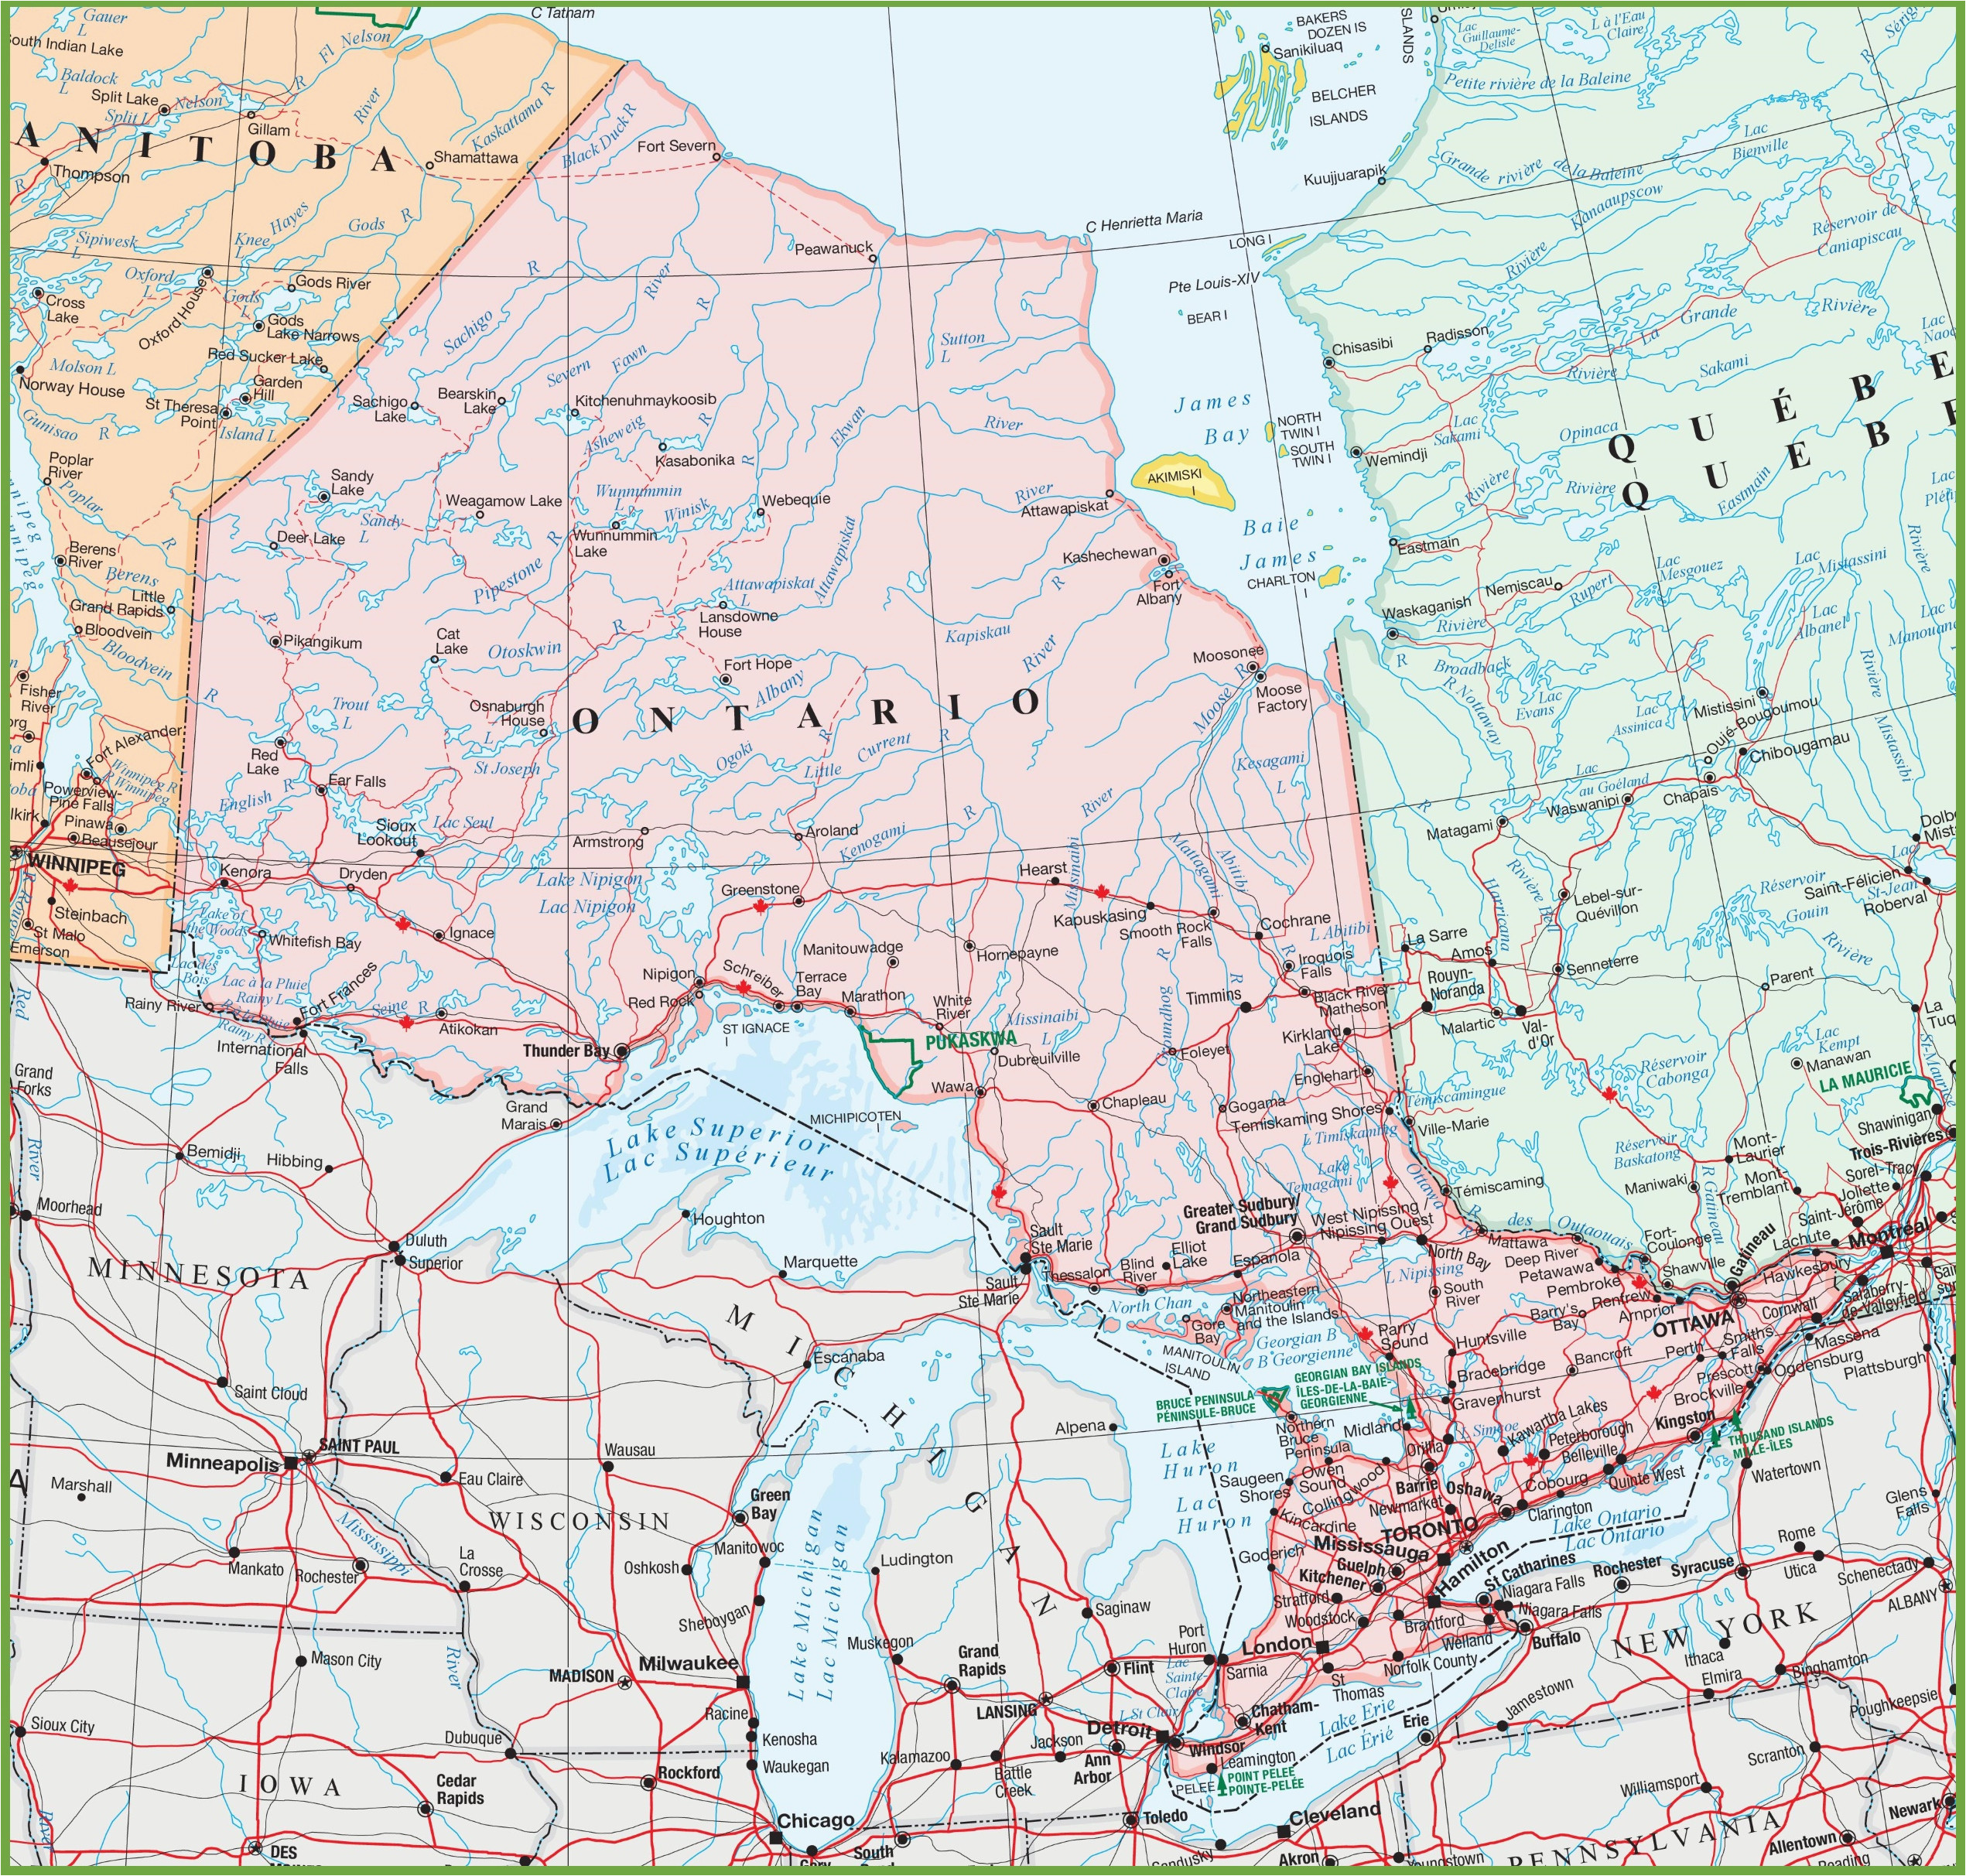 Map Of Ontario Canada Showing Cities Map Of Ontario with Cities and towns